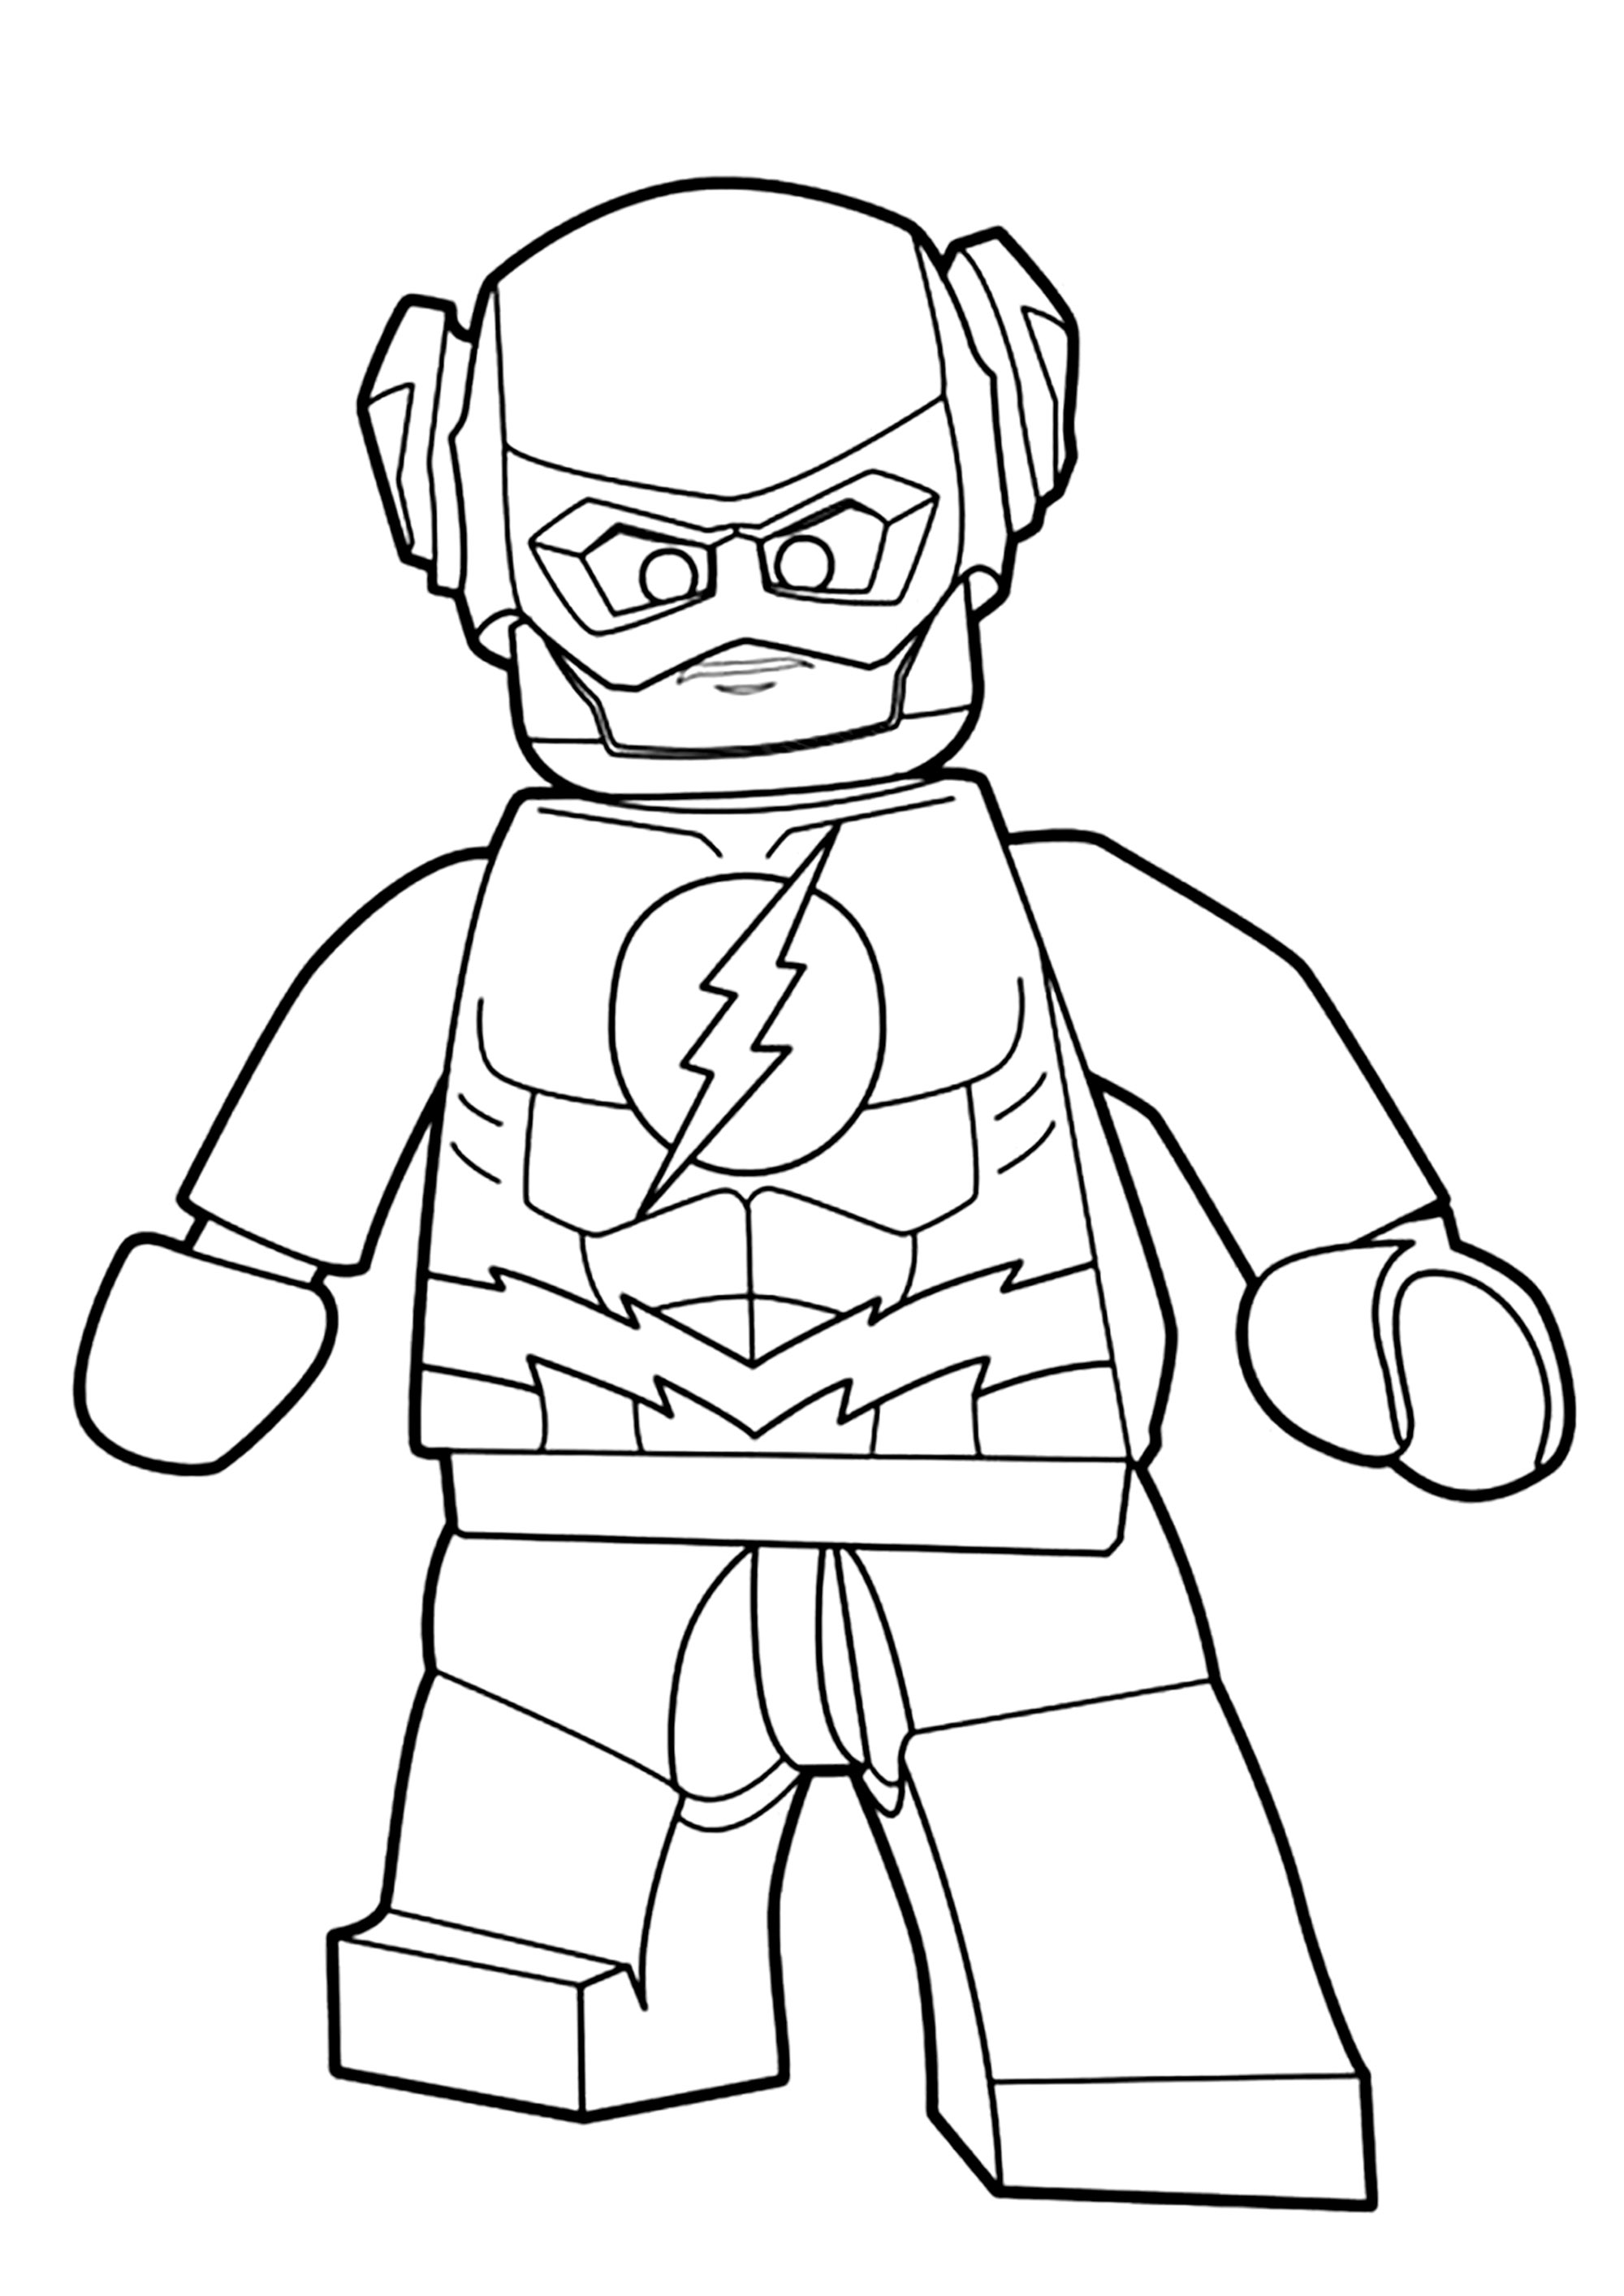 Flash - Lego Kids Coloring Pages